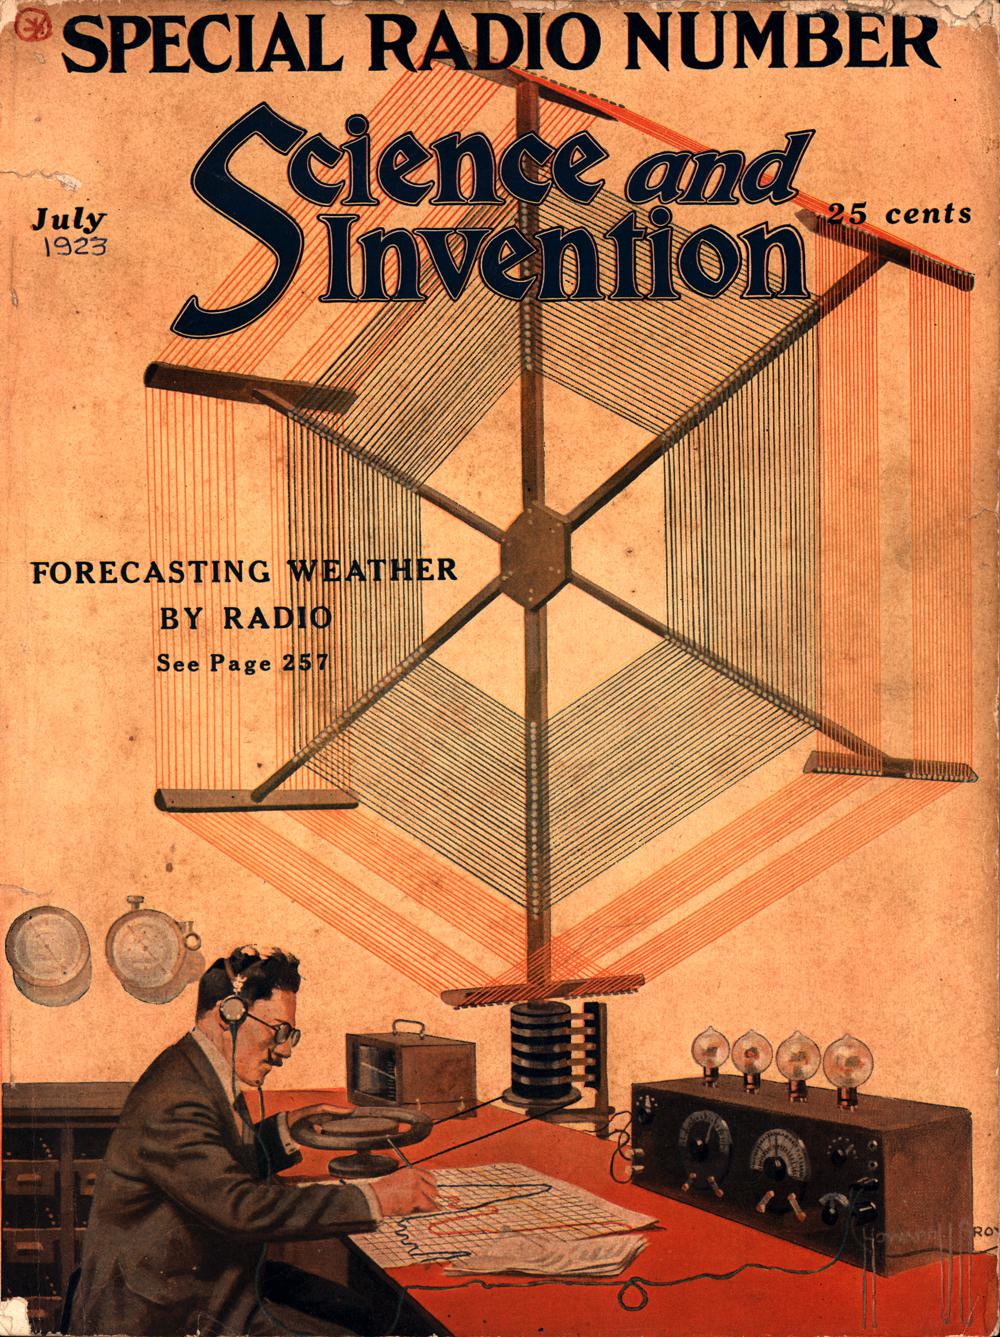 1923 - Science and invention - Vol. 11, No. 3